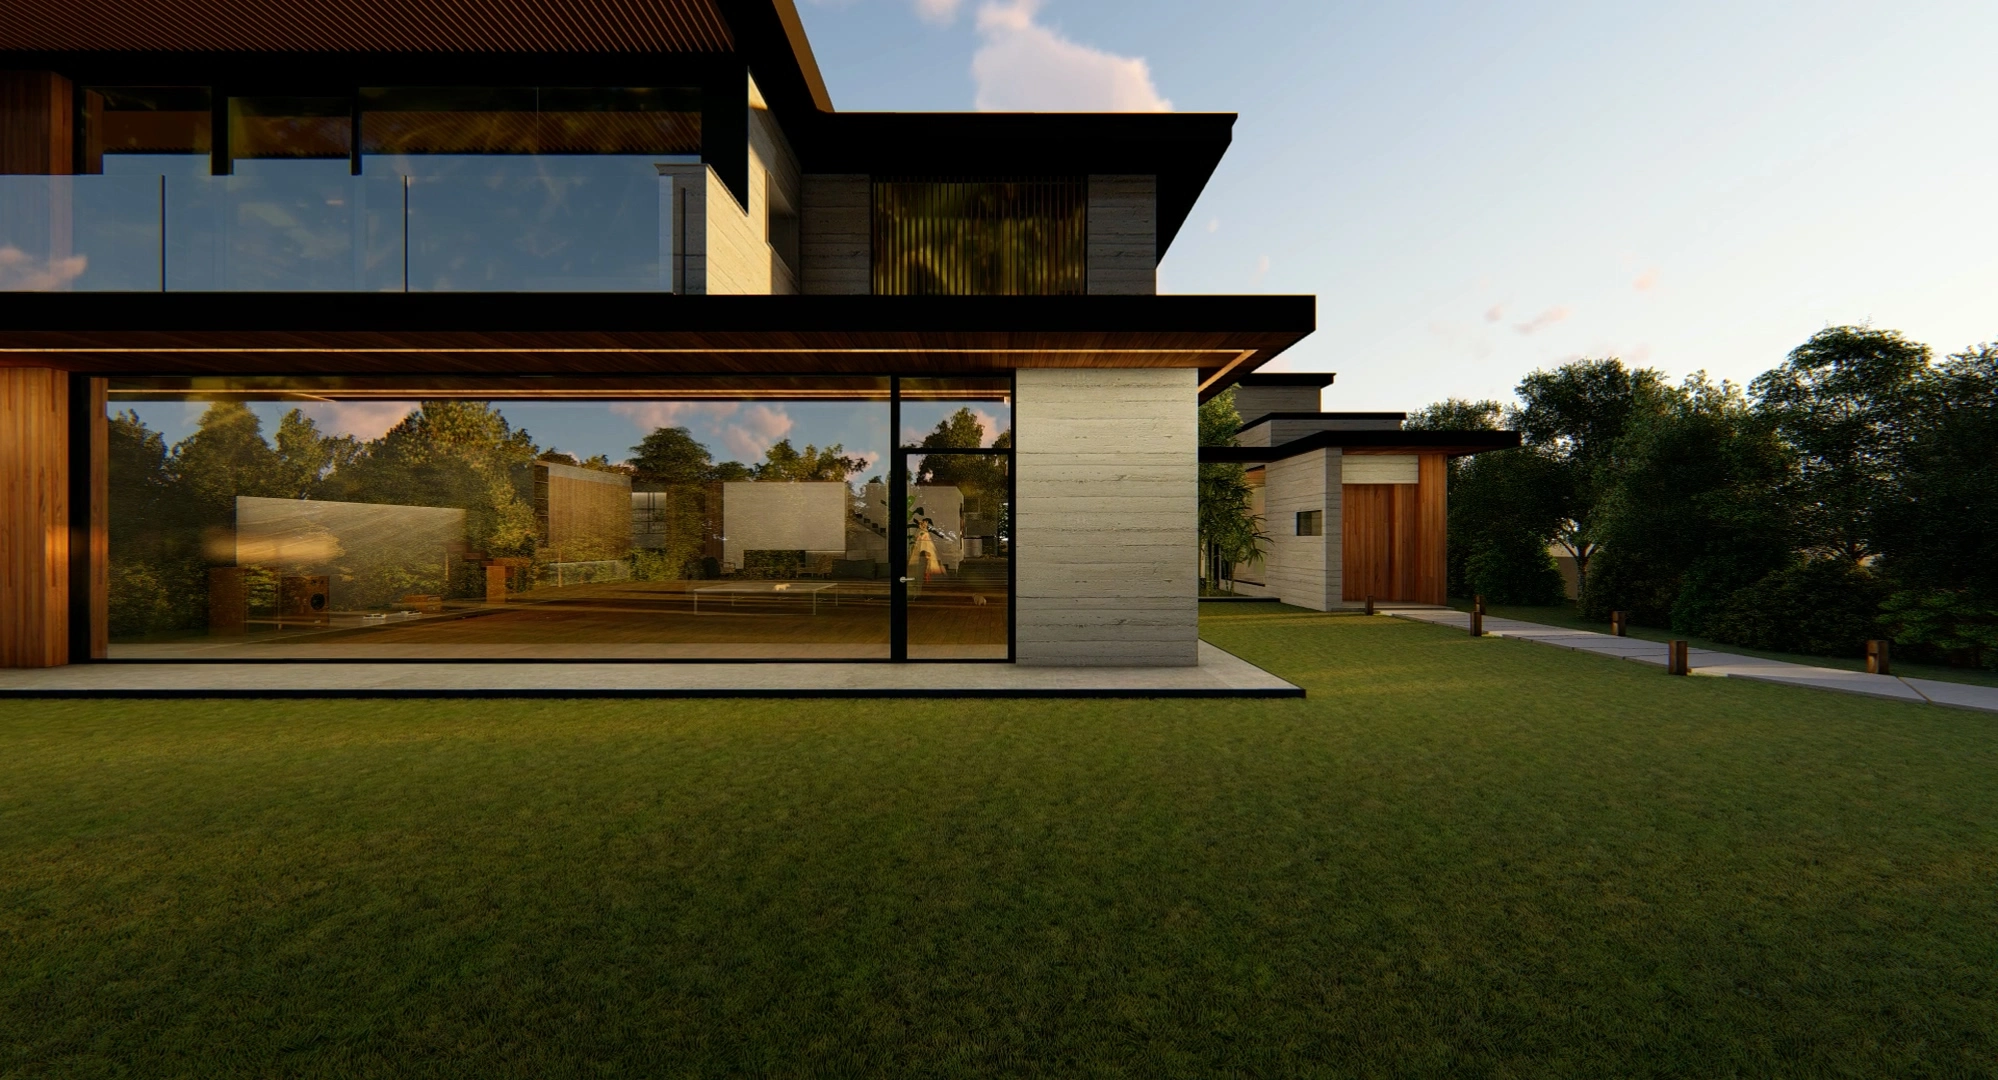 A shot from the film Parasite showing the exterior of the Park family's home. It is a sleek, modern house with lots of glass windows reflecting natural light, as well as a large, neatly cut lawn.